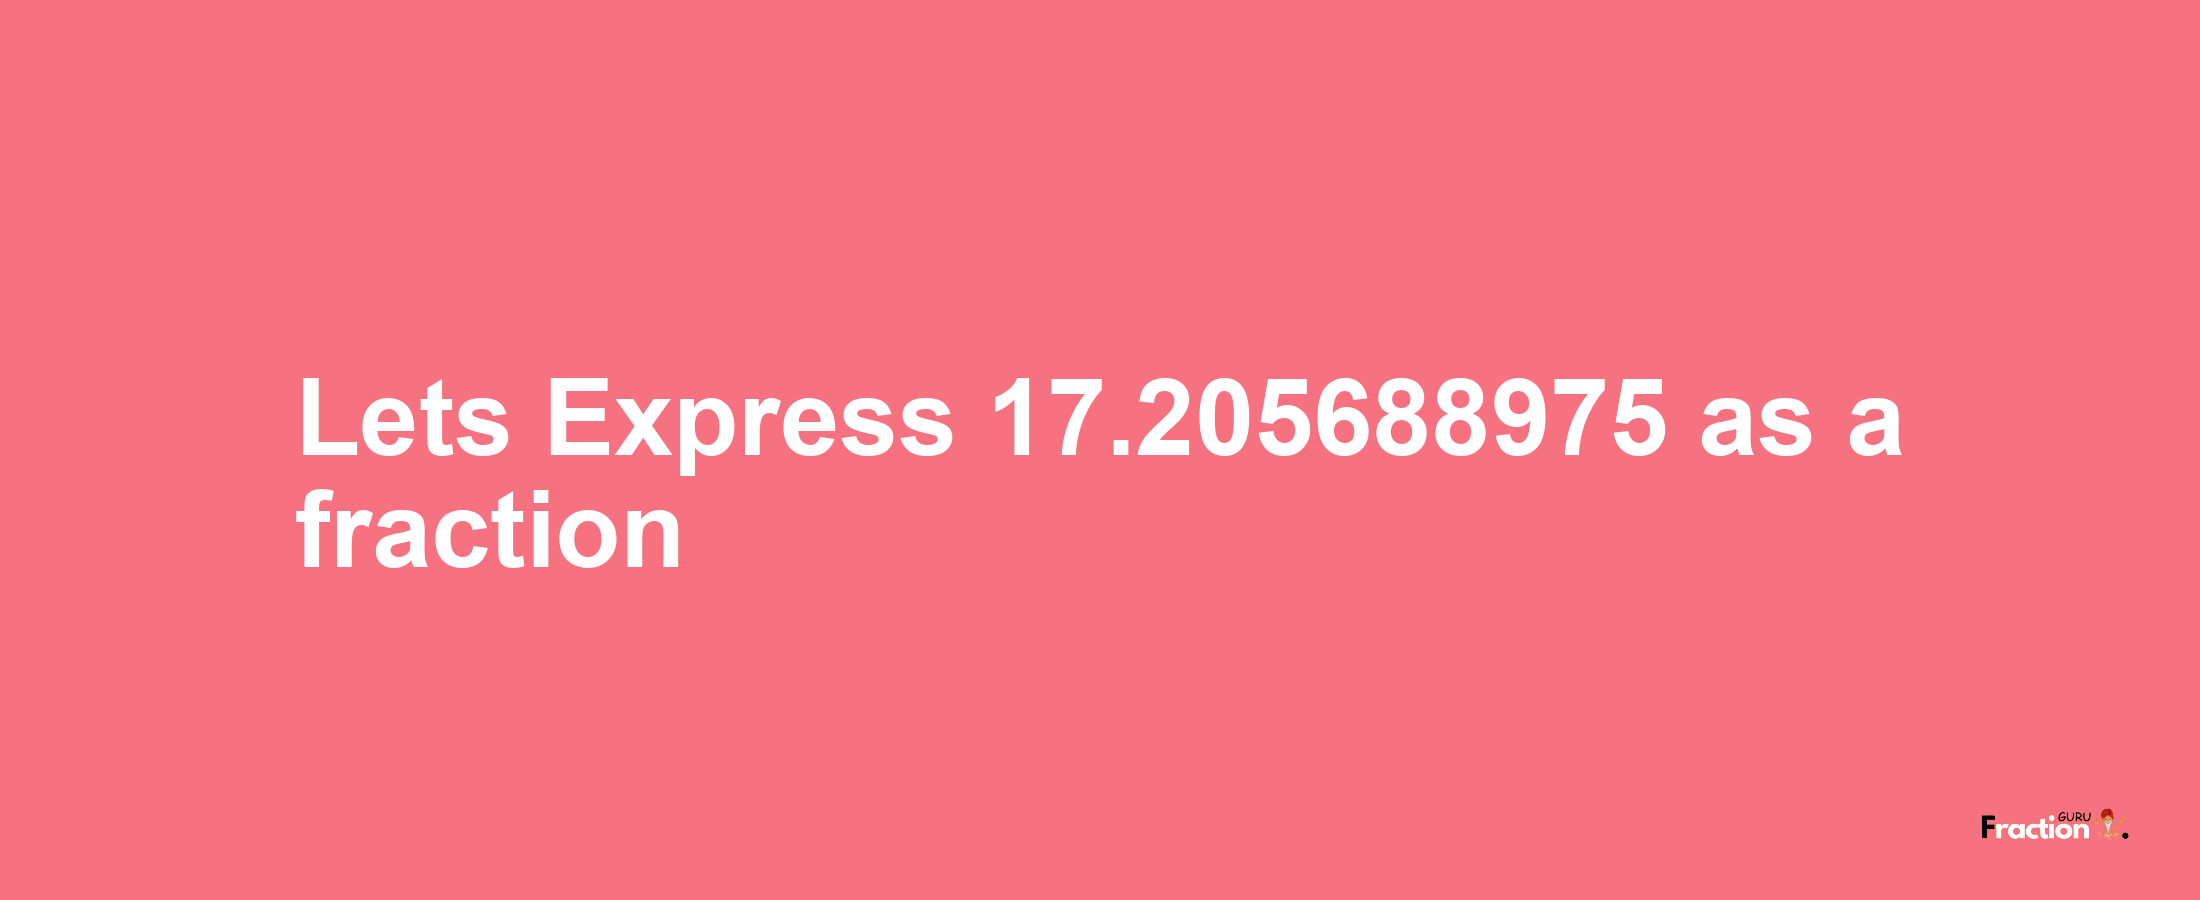 Lets Express 17.205688975 as afraction